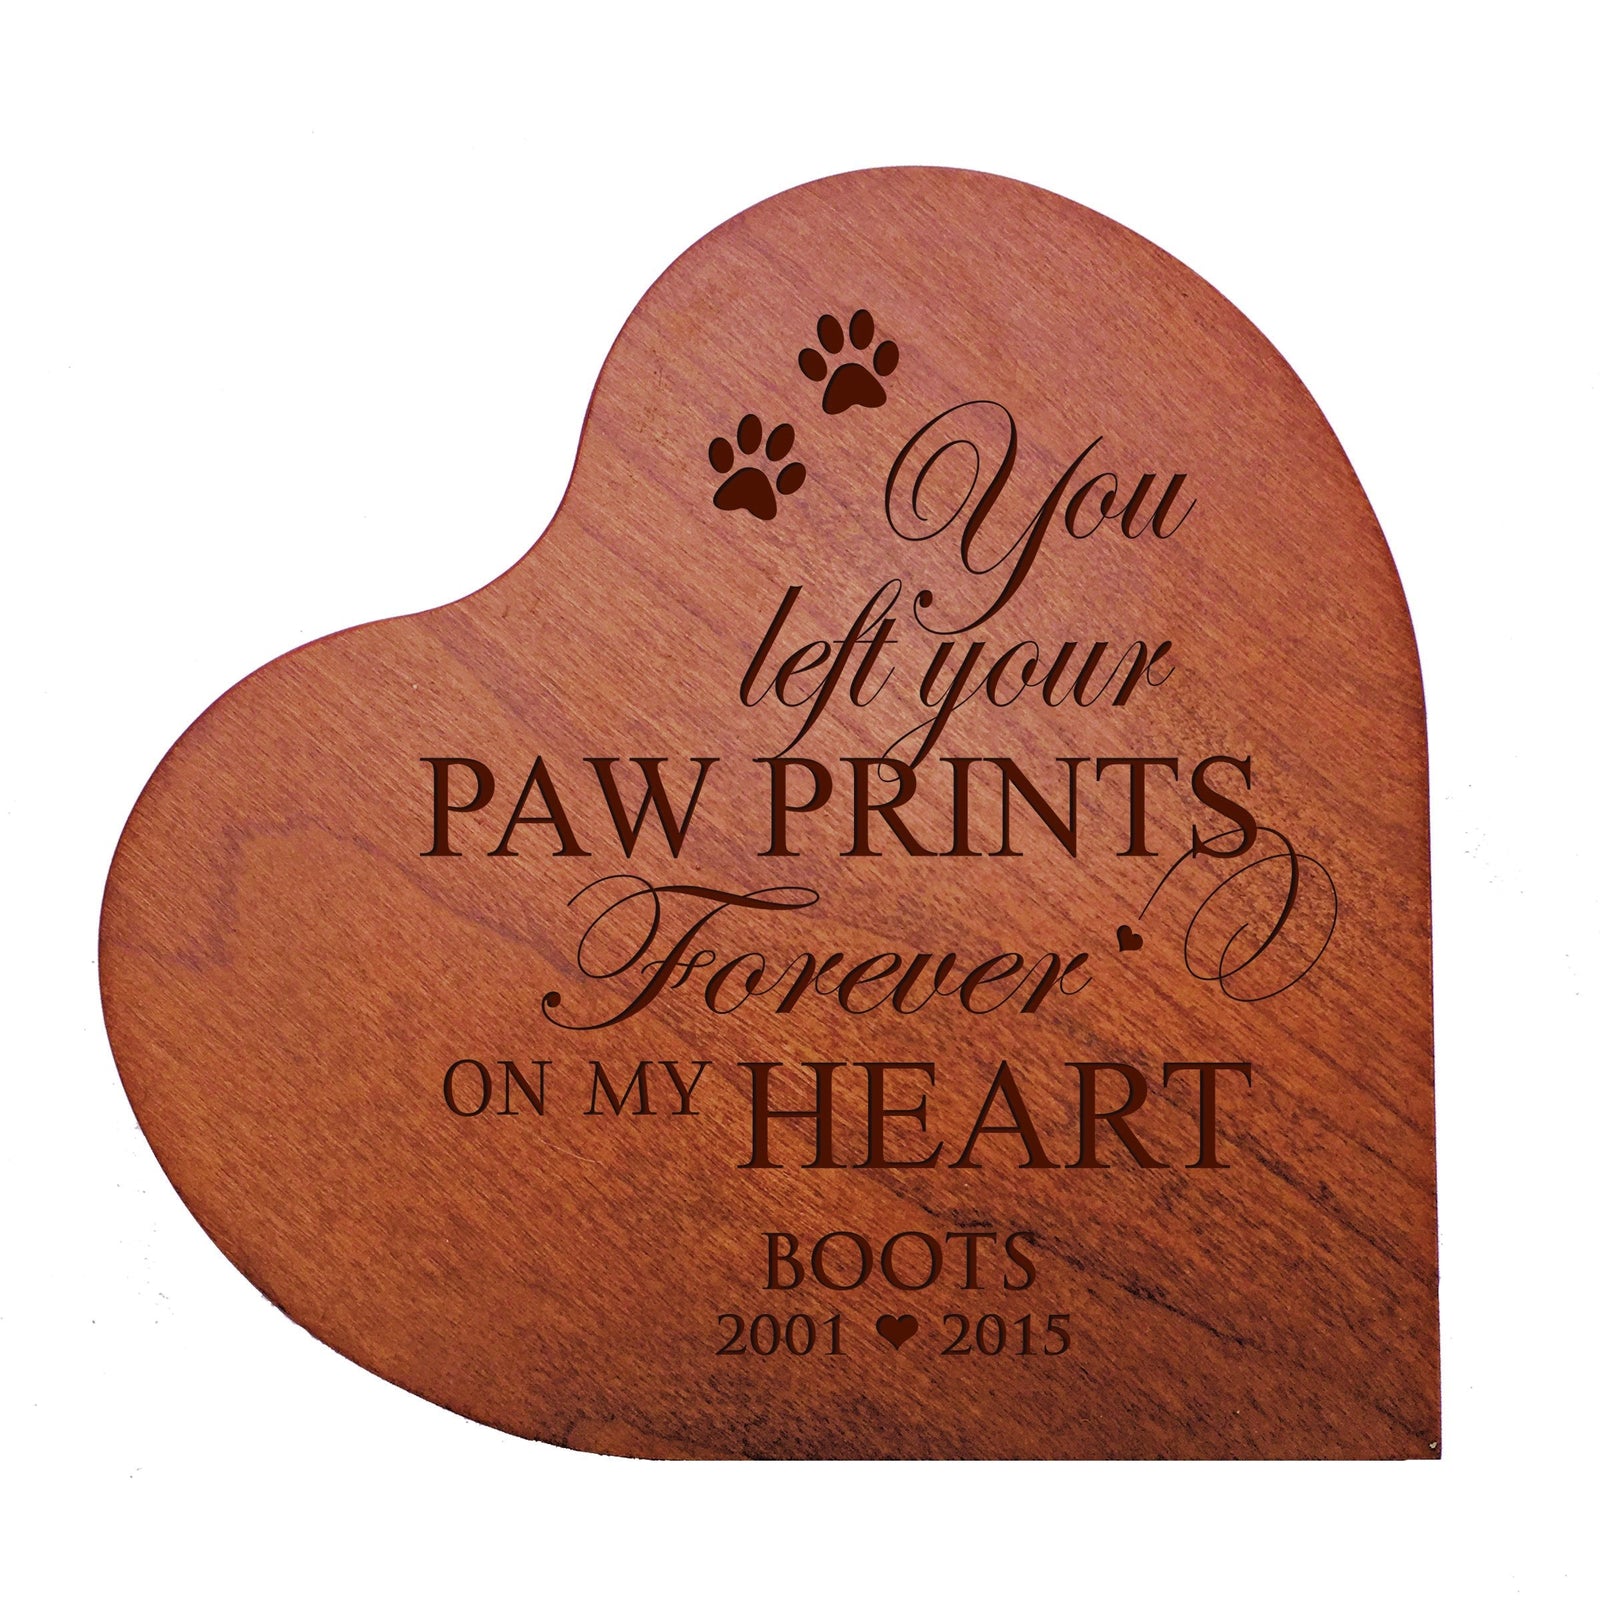 Cherry Pet Memorial Heart Block Decor with phrase "You Left Your Paw Prints"